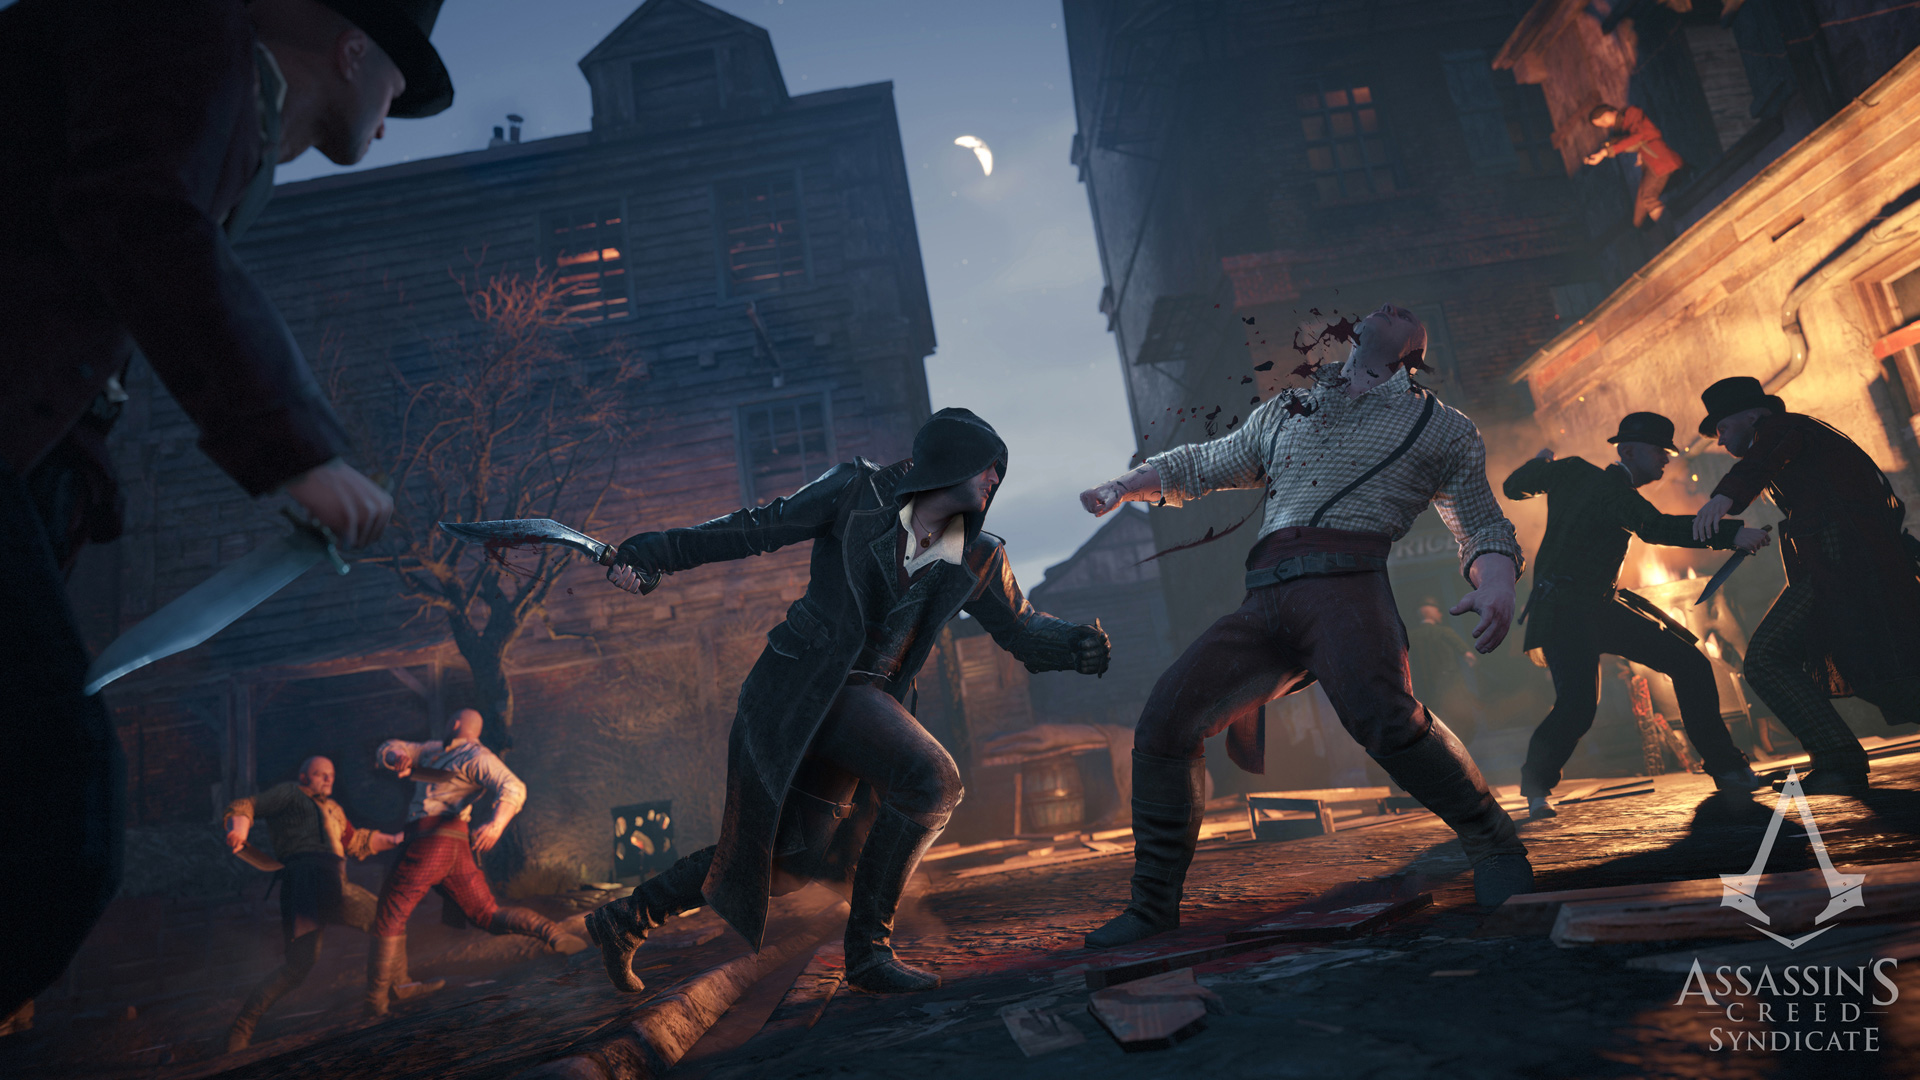 Assassin's Creed: Syndicate shown at E3 2015